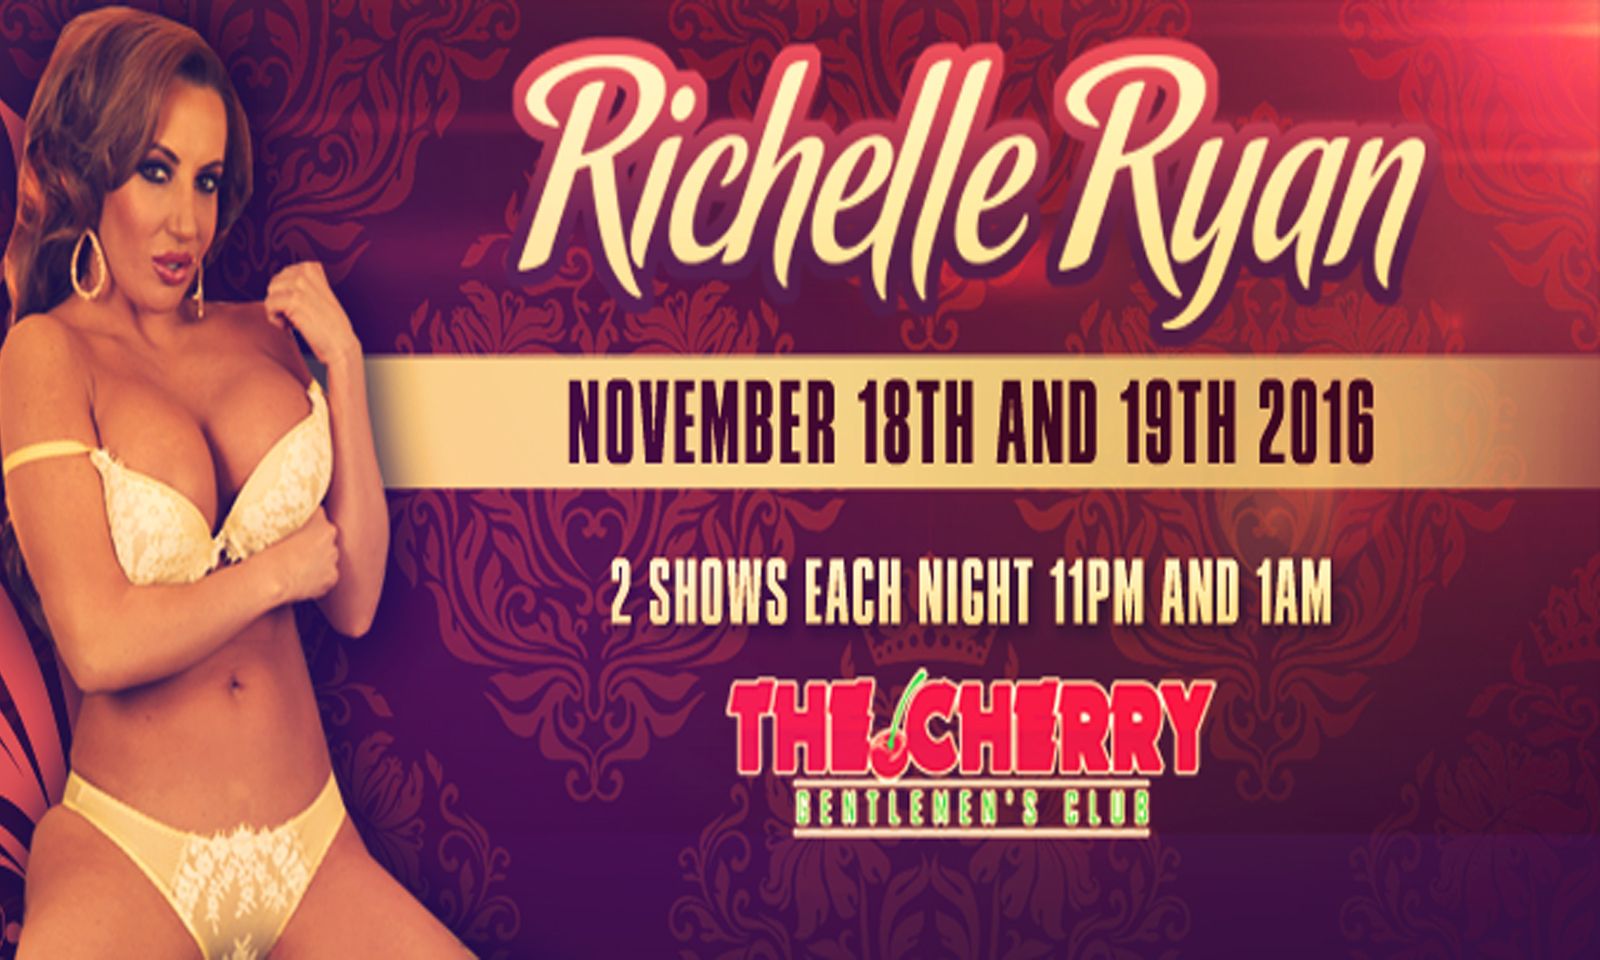 Richelle Ryan to Appear at The Cherry Club in Huntsville, AL